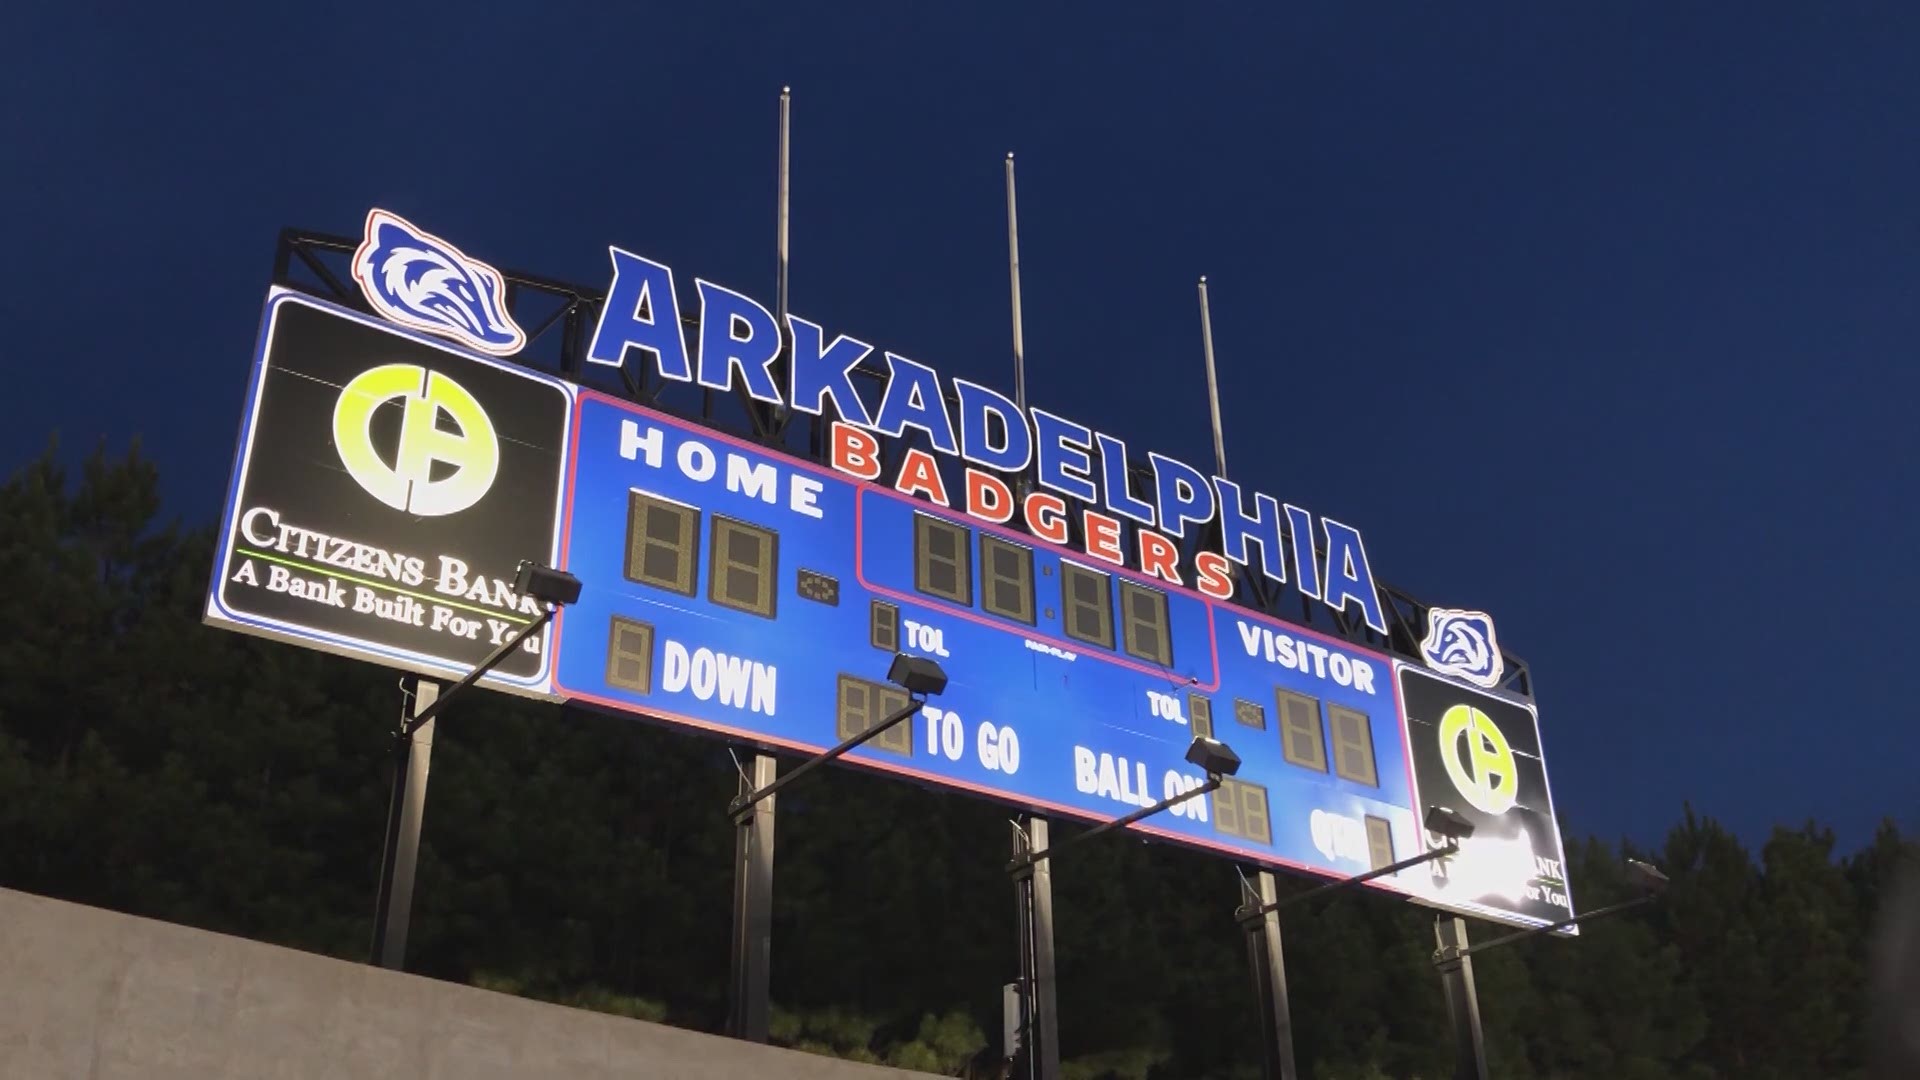 The defending 4A State Champs were up and at 'em this morning, so THV11 stopped by to see what all the hype was about down in Arkadelphia!